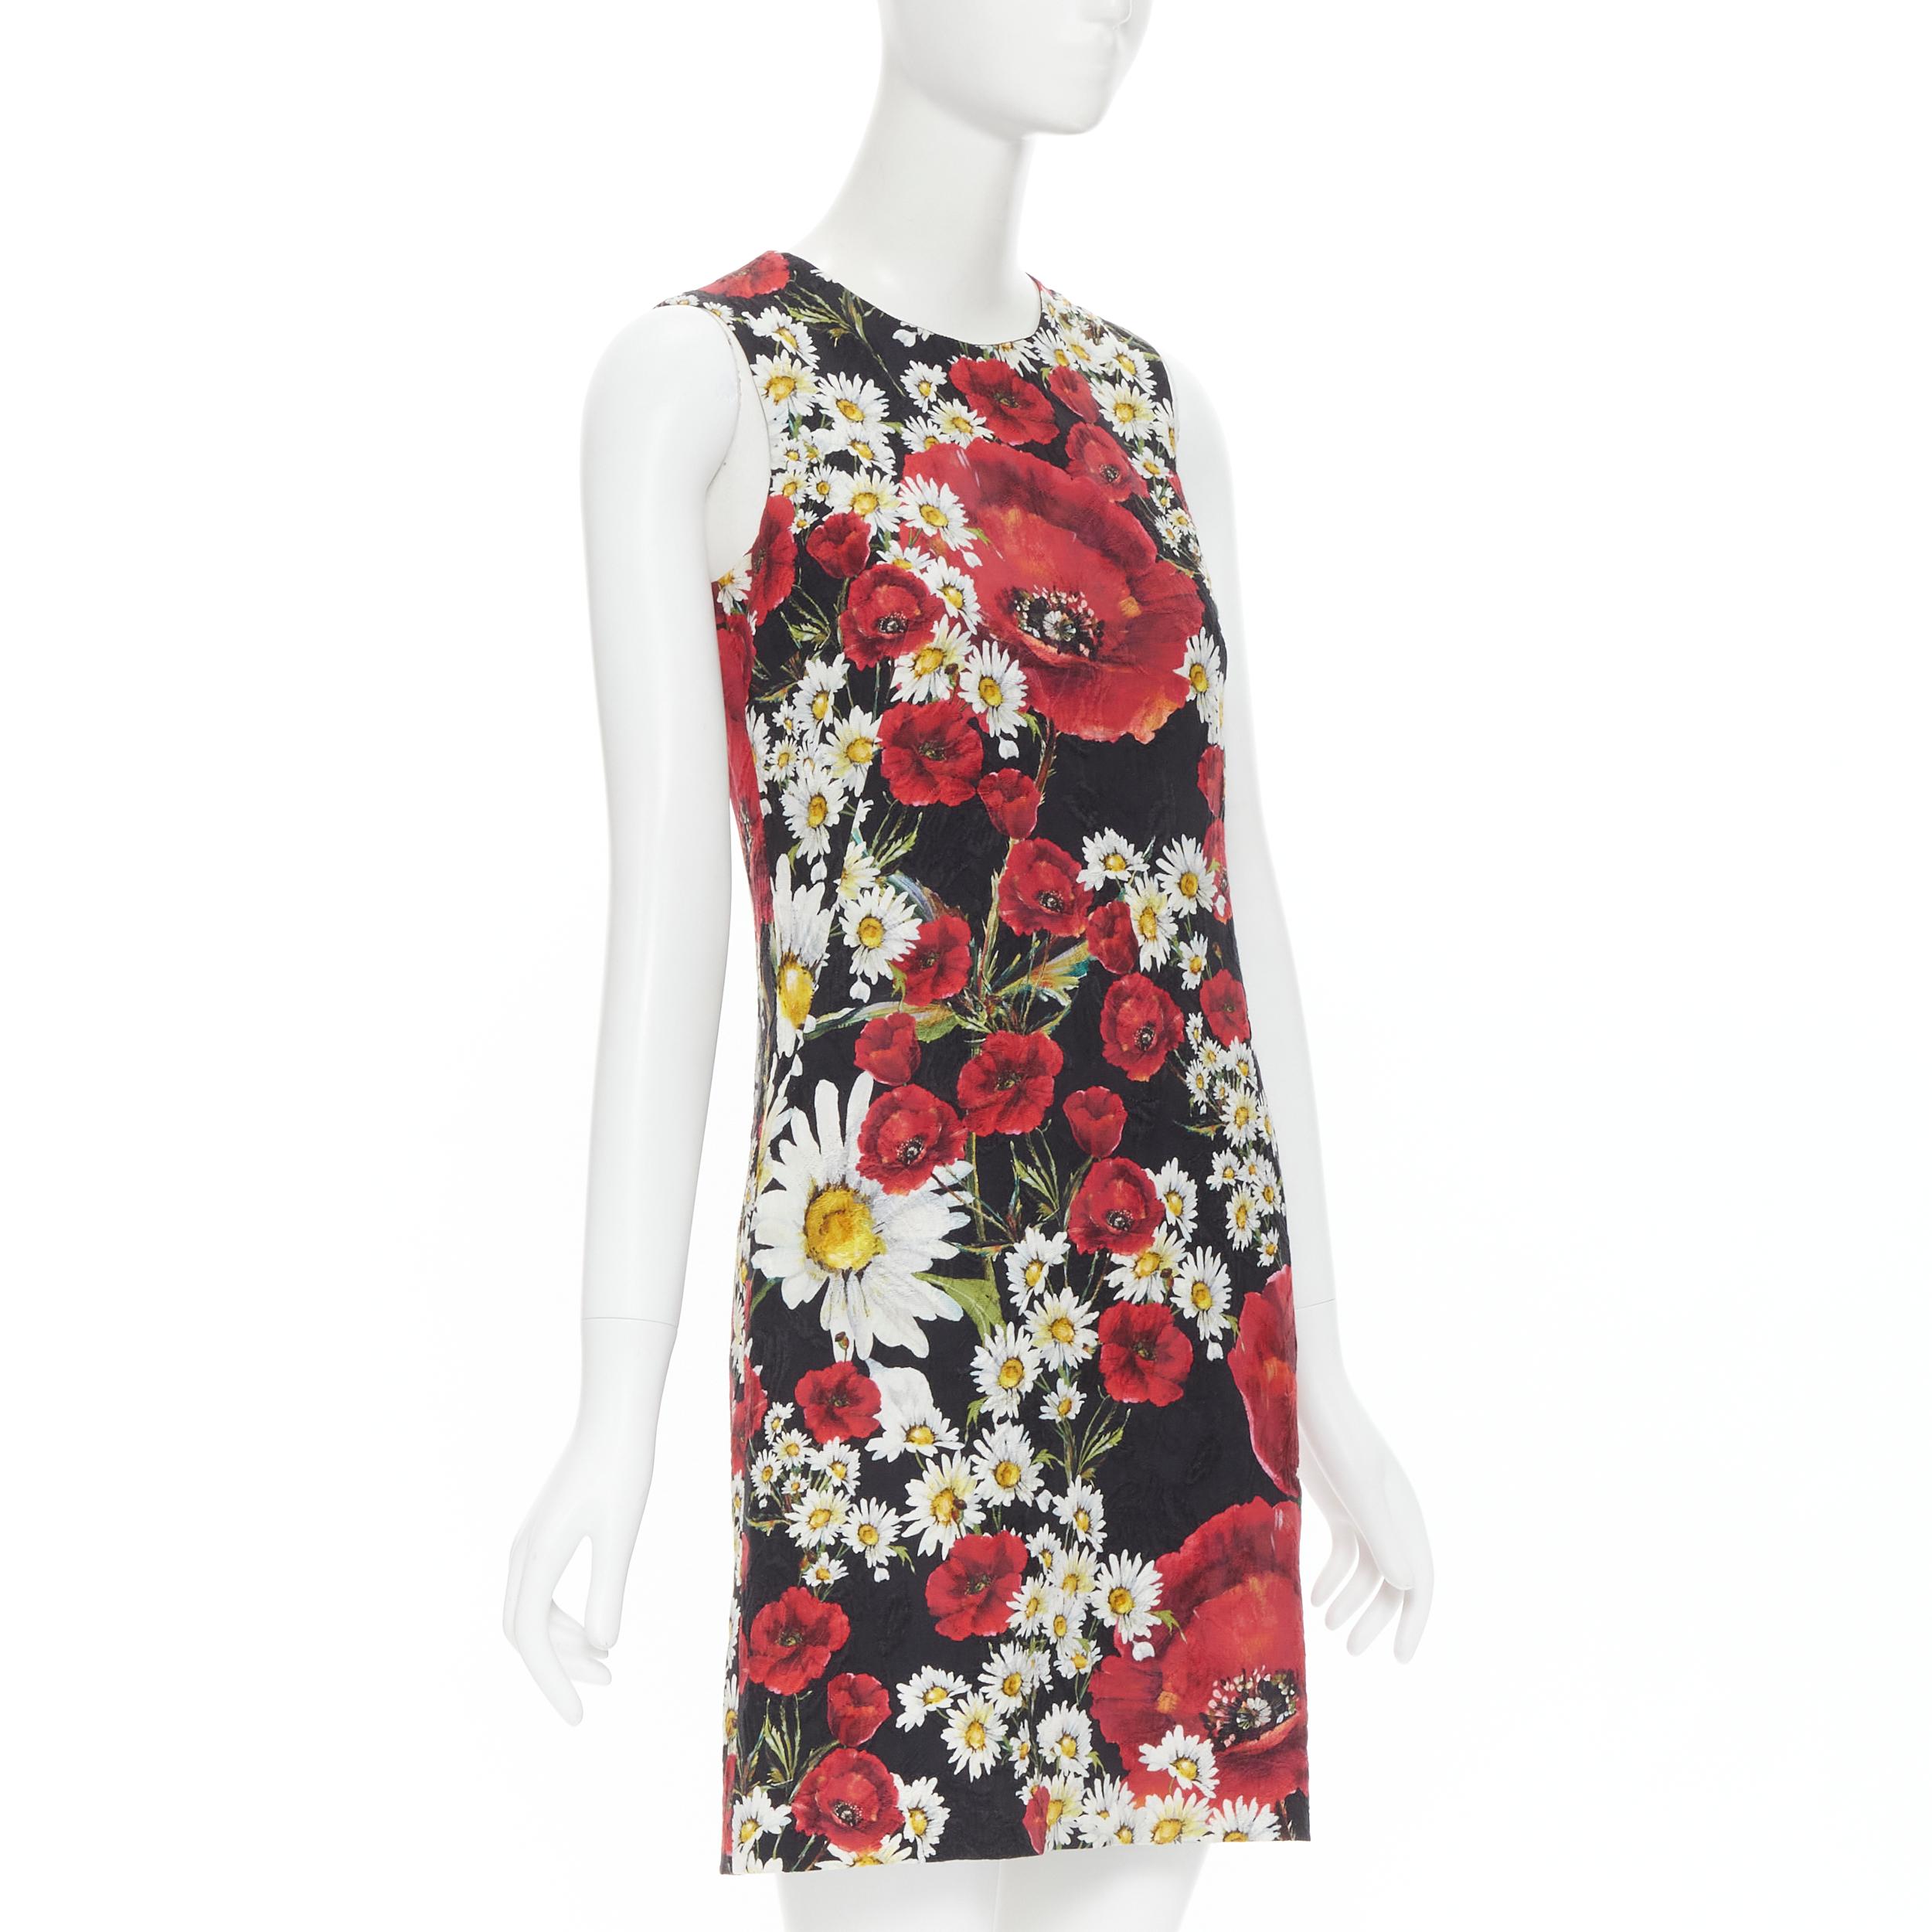 DOLCE GABBANA Poppy Daisy floral print jacquard mini sheath dress IT36 XS 
Reference: TGAS/B01460 
Brand: Dolce Gabbana 
Material: Cotton 
Color: Black 
Pattern: Floral 
Closure: Zip 
Extra Detail: Red and white poppy floral print on textured